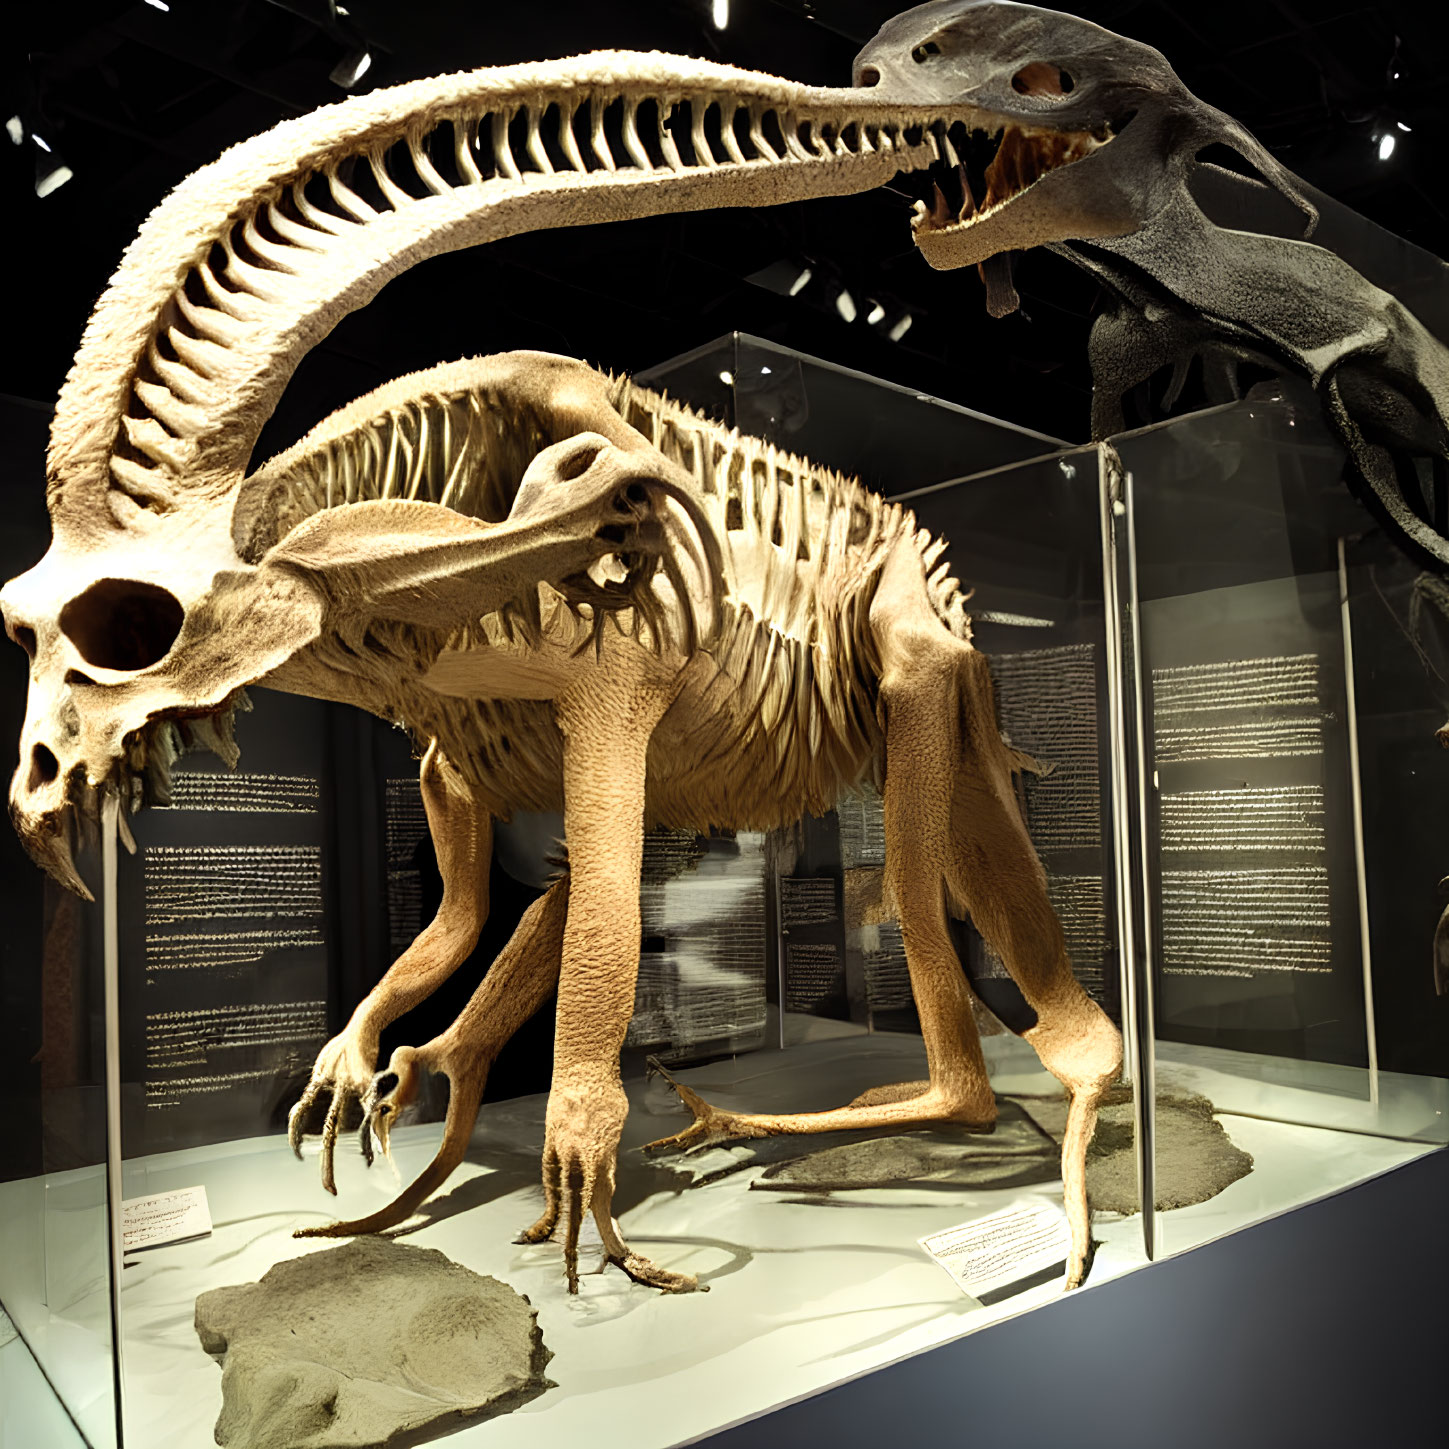 Large bipedal theropod skeleton in aggressive pose at museum exhibit